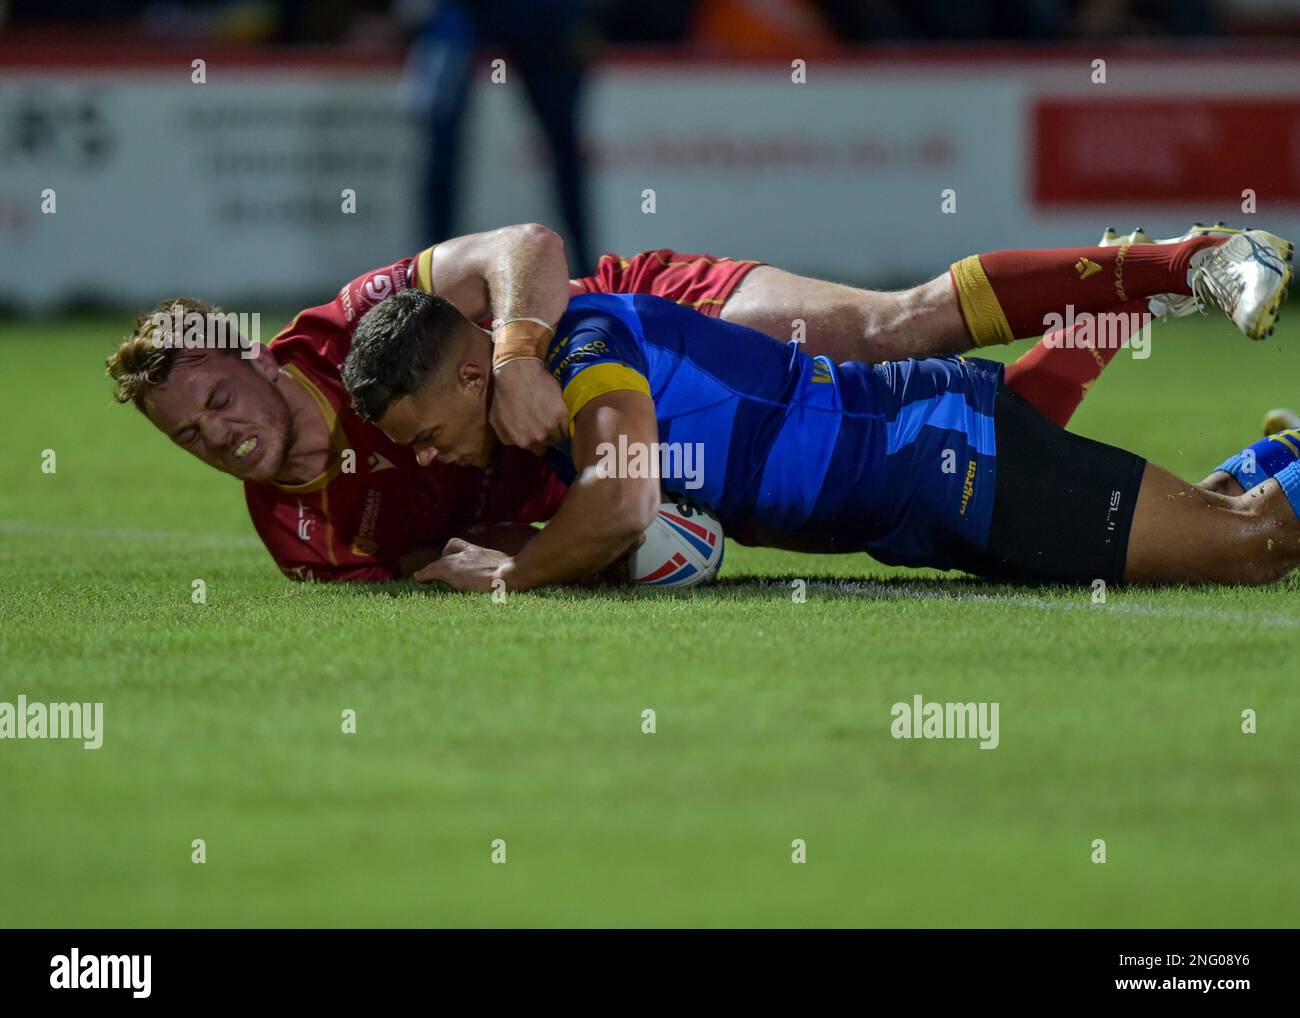 Wakefield, UK. 17th Feb, 2023. Corey Hall of Wakefield Trinity scores a try  Wakefield Trinity v Catalan Dragons,  at the Bell vue, Wakefield, West Yorkshire, UK on the 17th February 2023  Photo Credit Craig Cresswell Photography Credit: Craig Cresswell/Alamy Live News Stock Photo